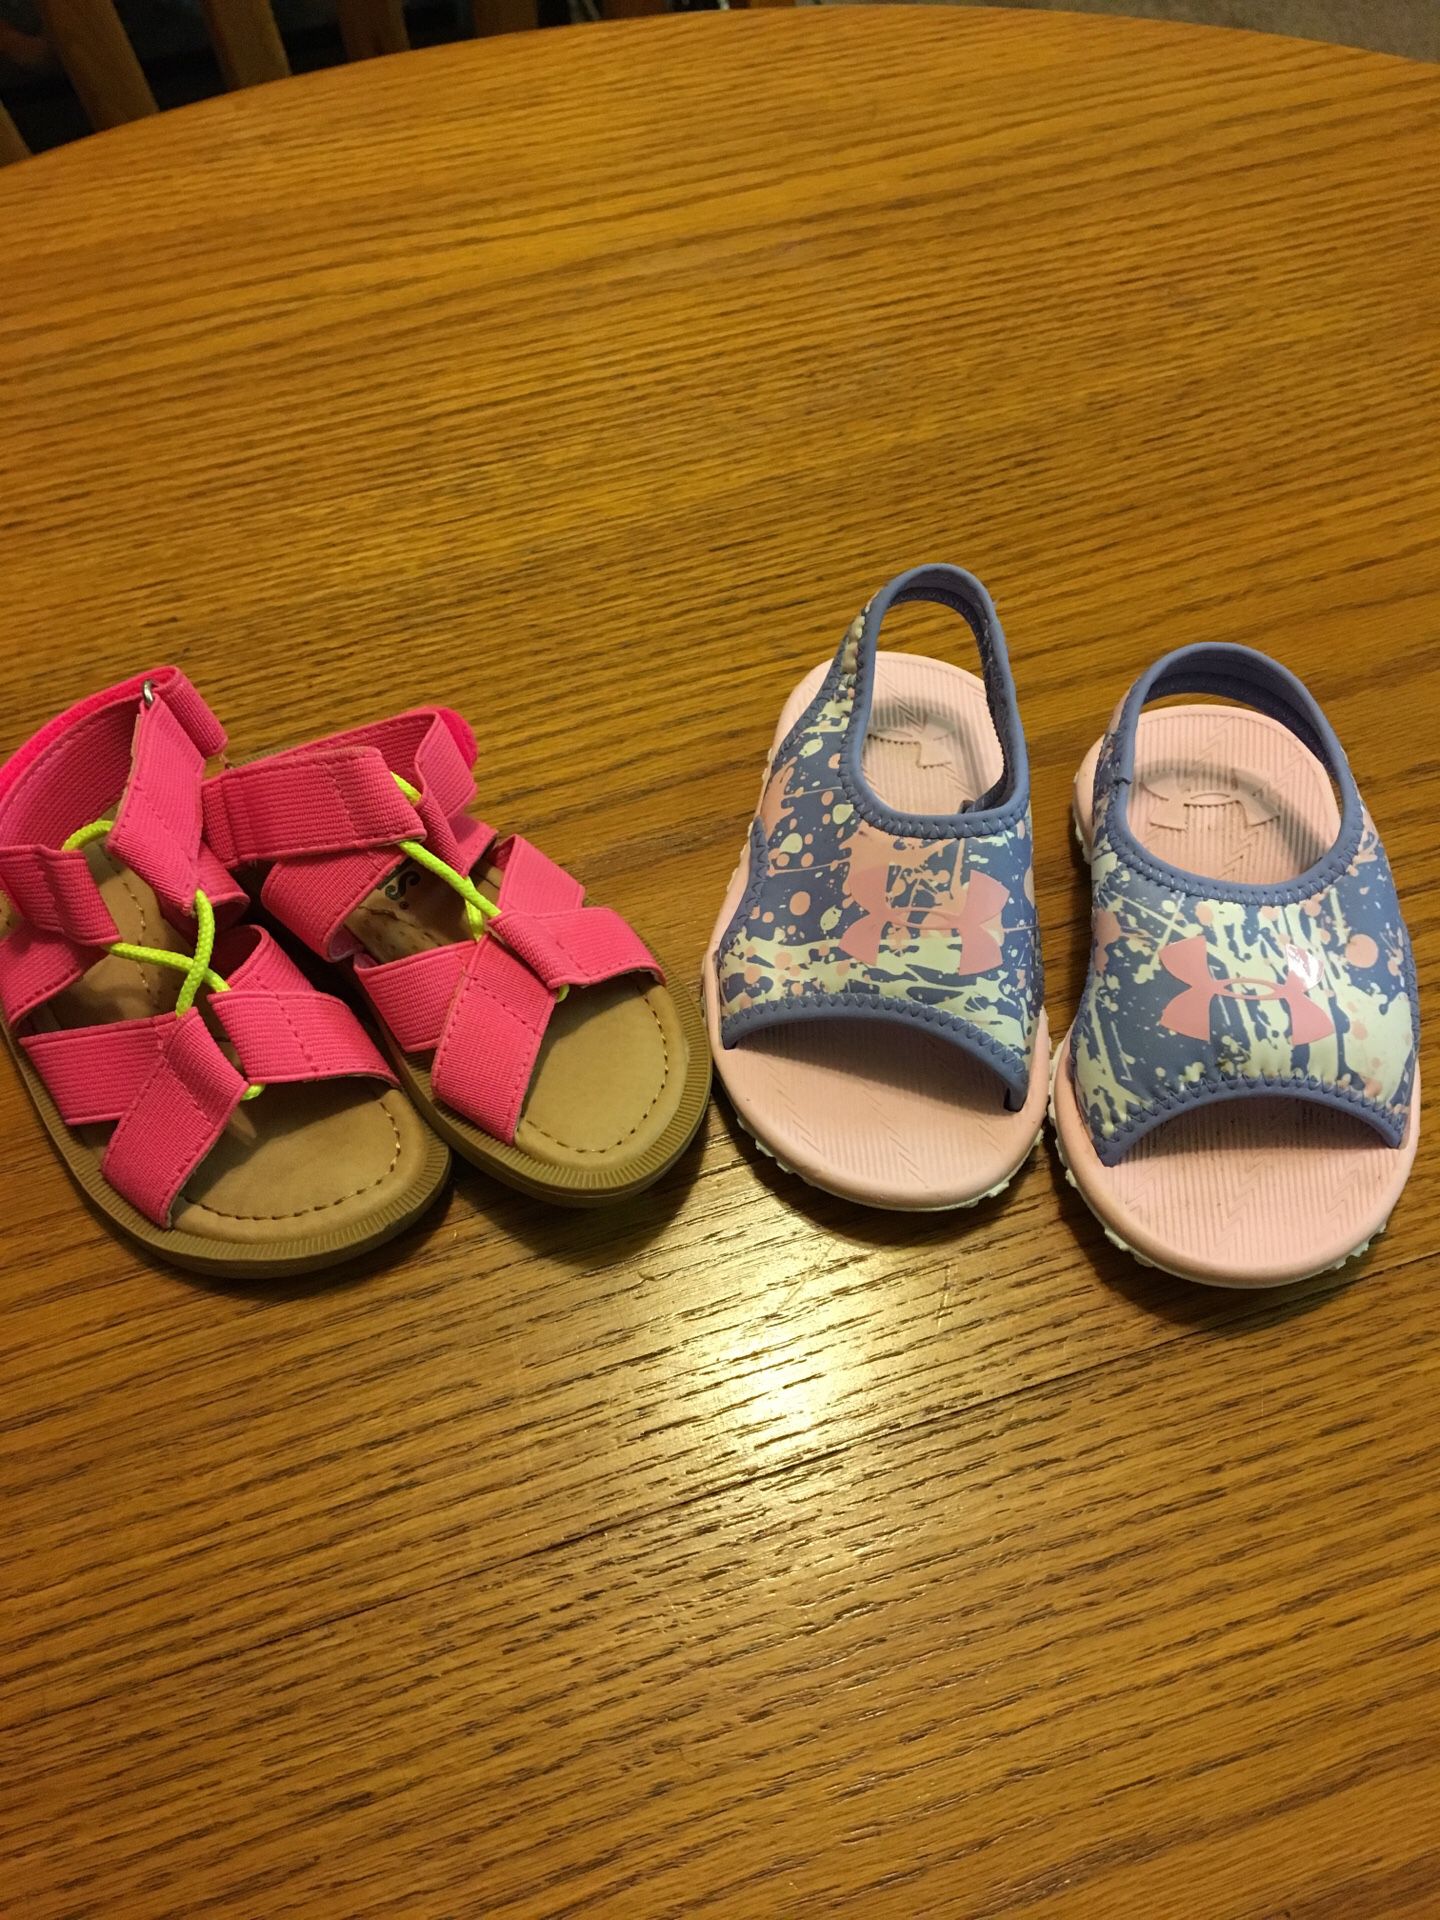 Toddler sandals size 7. Worn once each